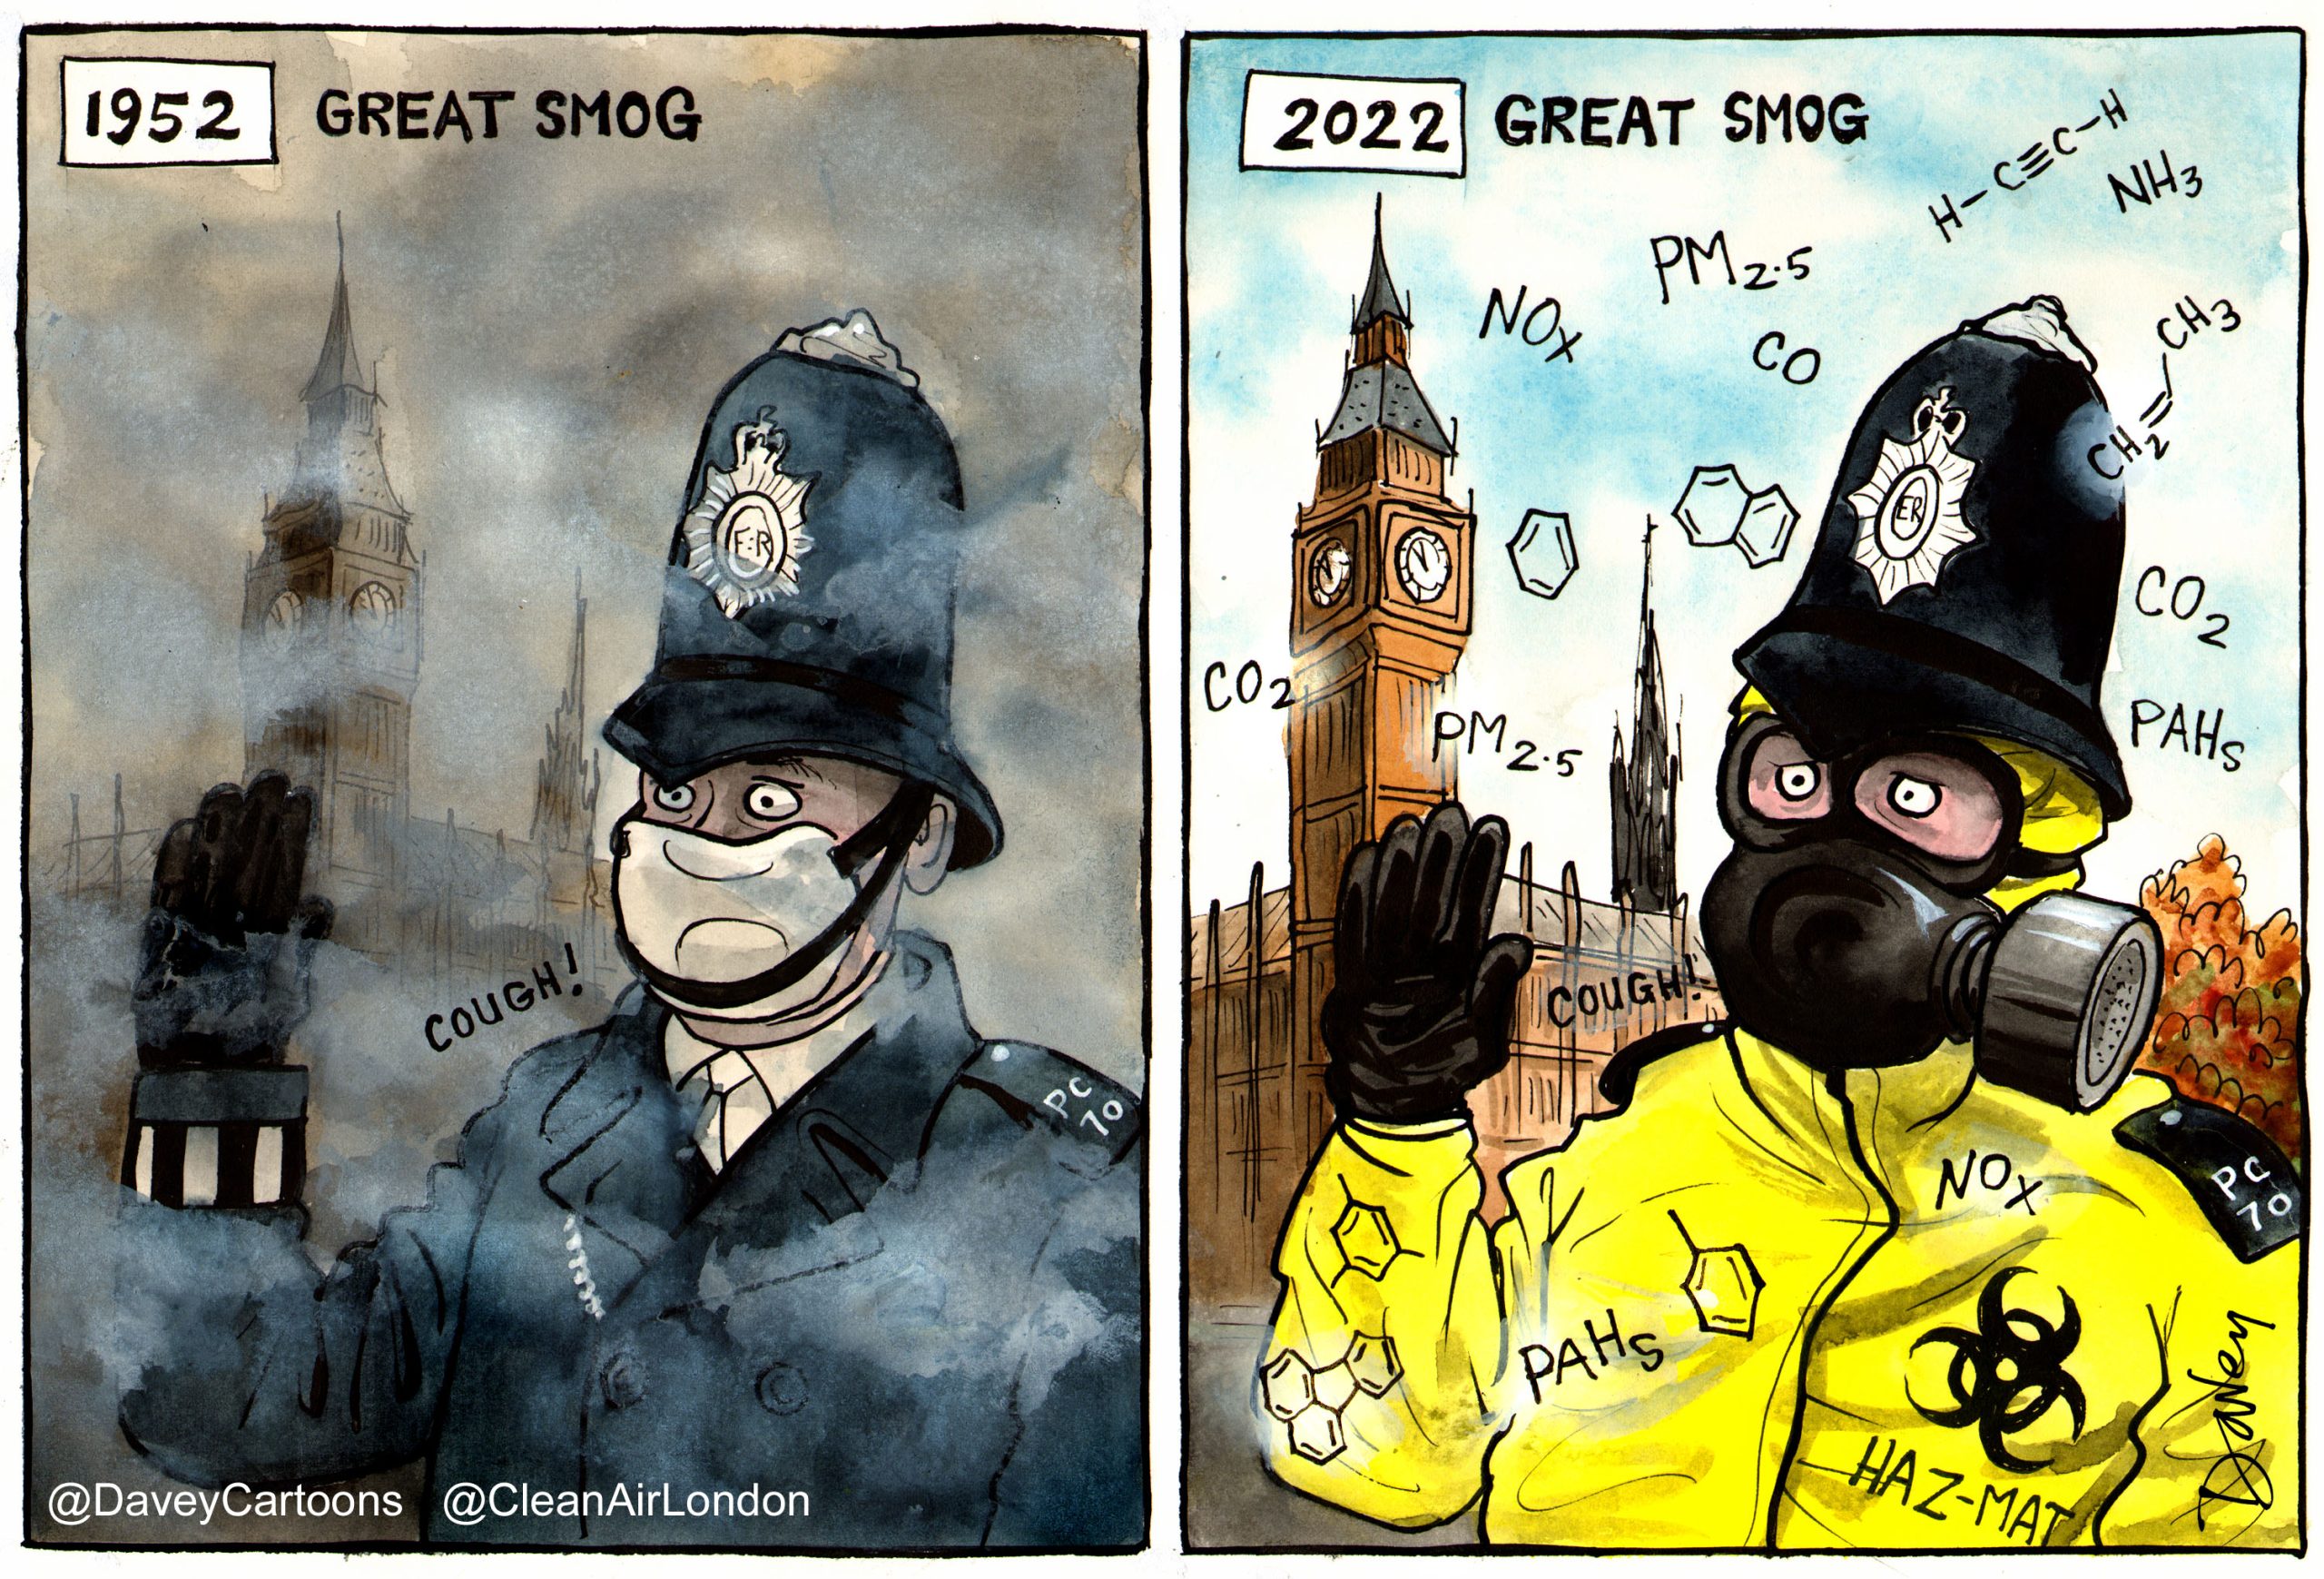 Great Smog’s 70th anniversary – Take action!